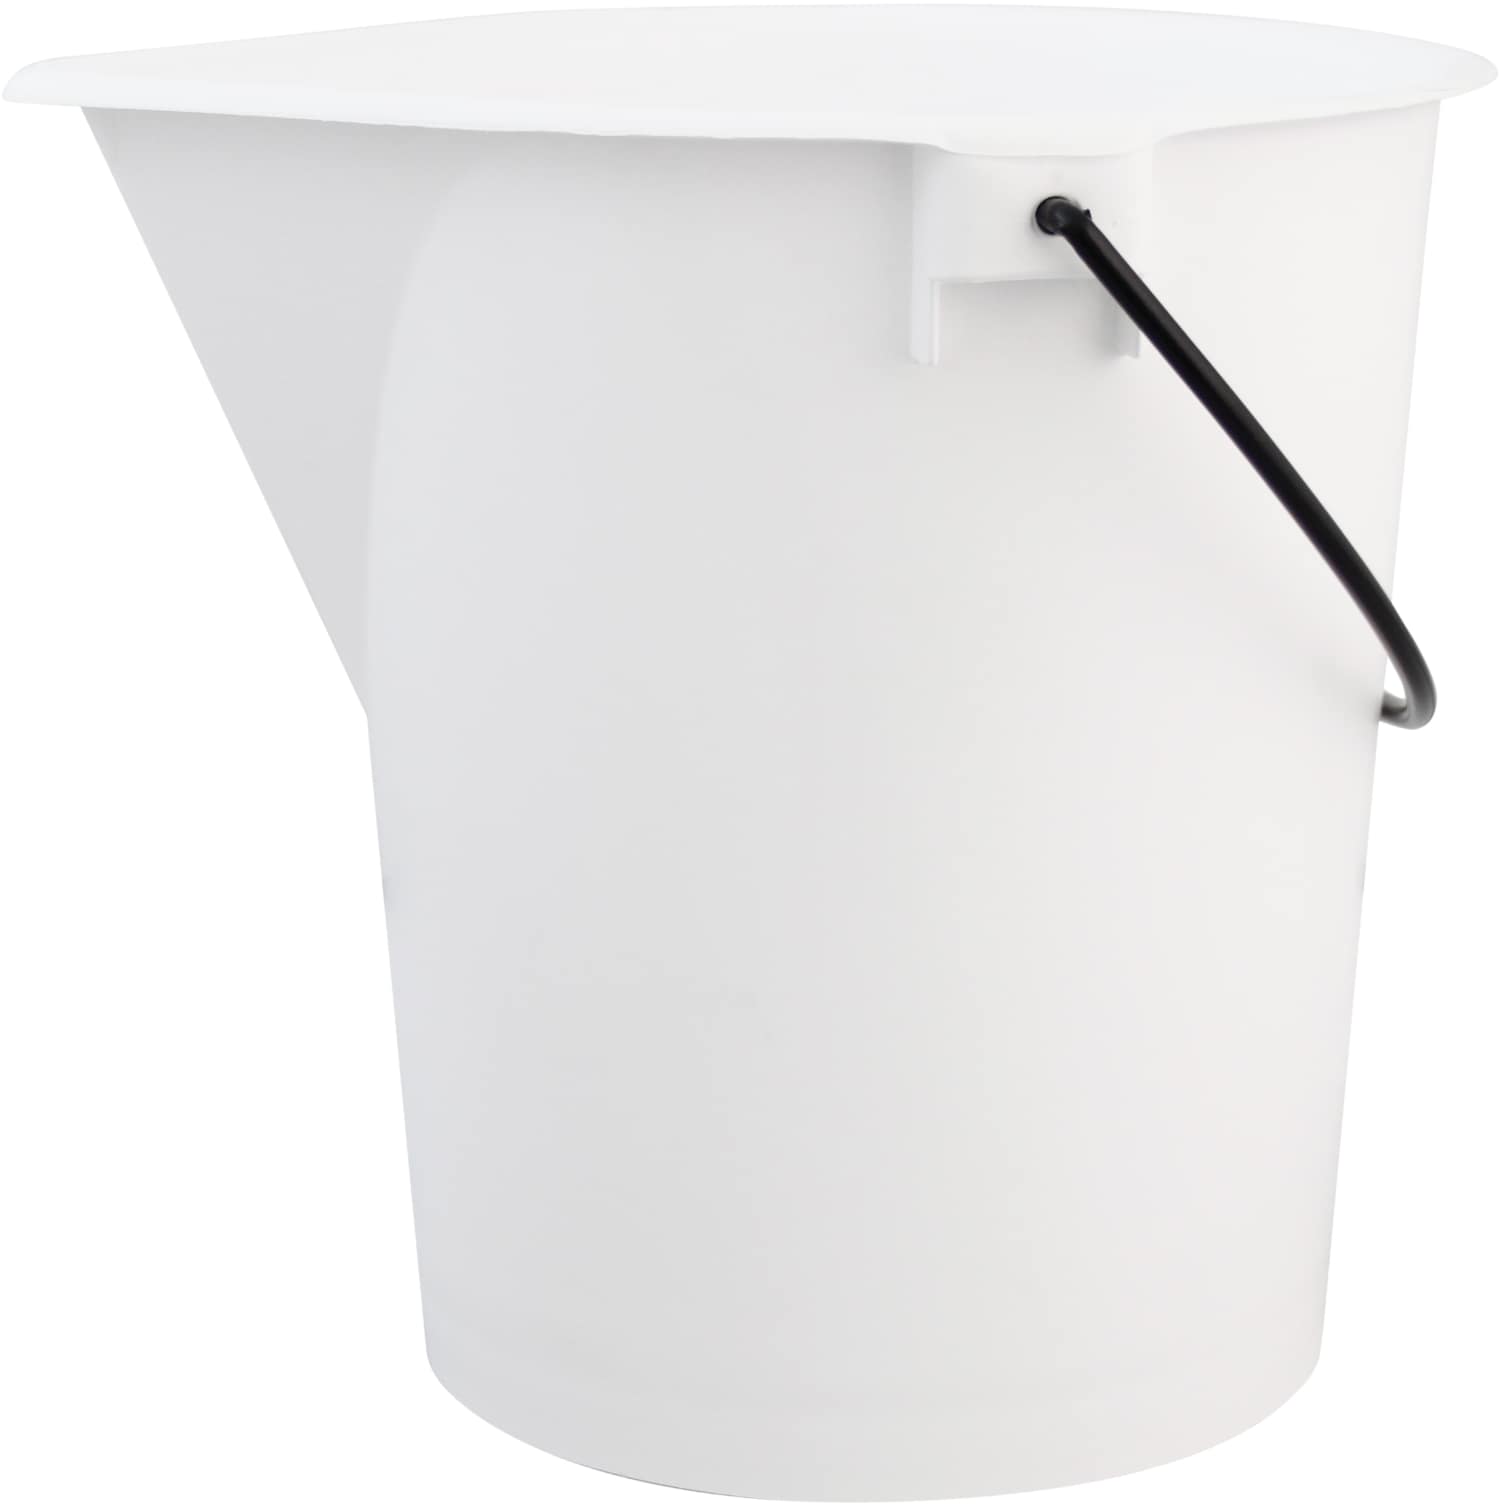 Bucket with spout and metal handle - heavy duty quality